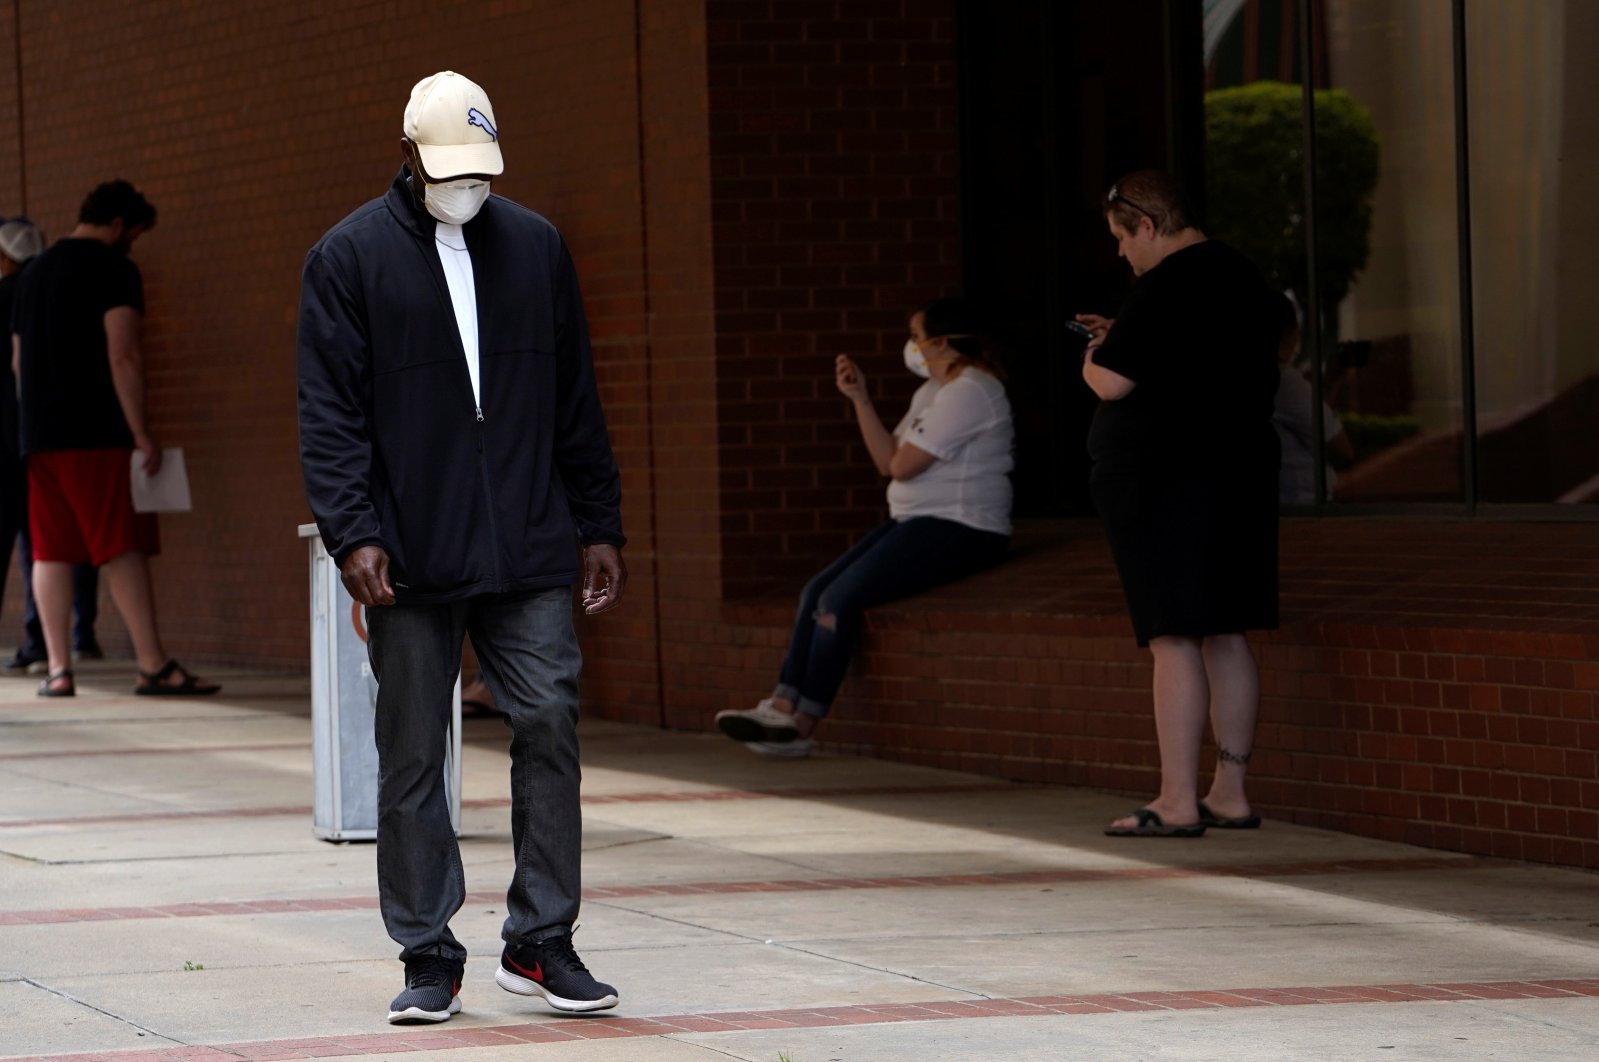 A man who lost his job walks past others as they wait in line to file for unemployment during the coronavirus pandemic, at an Arkansas Workforce Center in Fort Smith, Arkansas, U.S., April 6, 2020. (Reuters Photo)